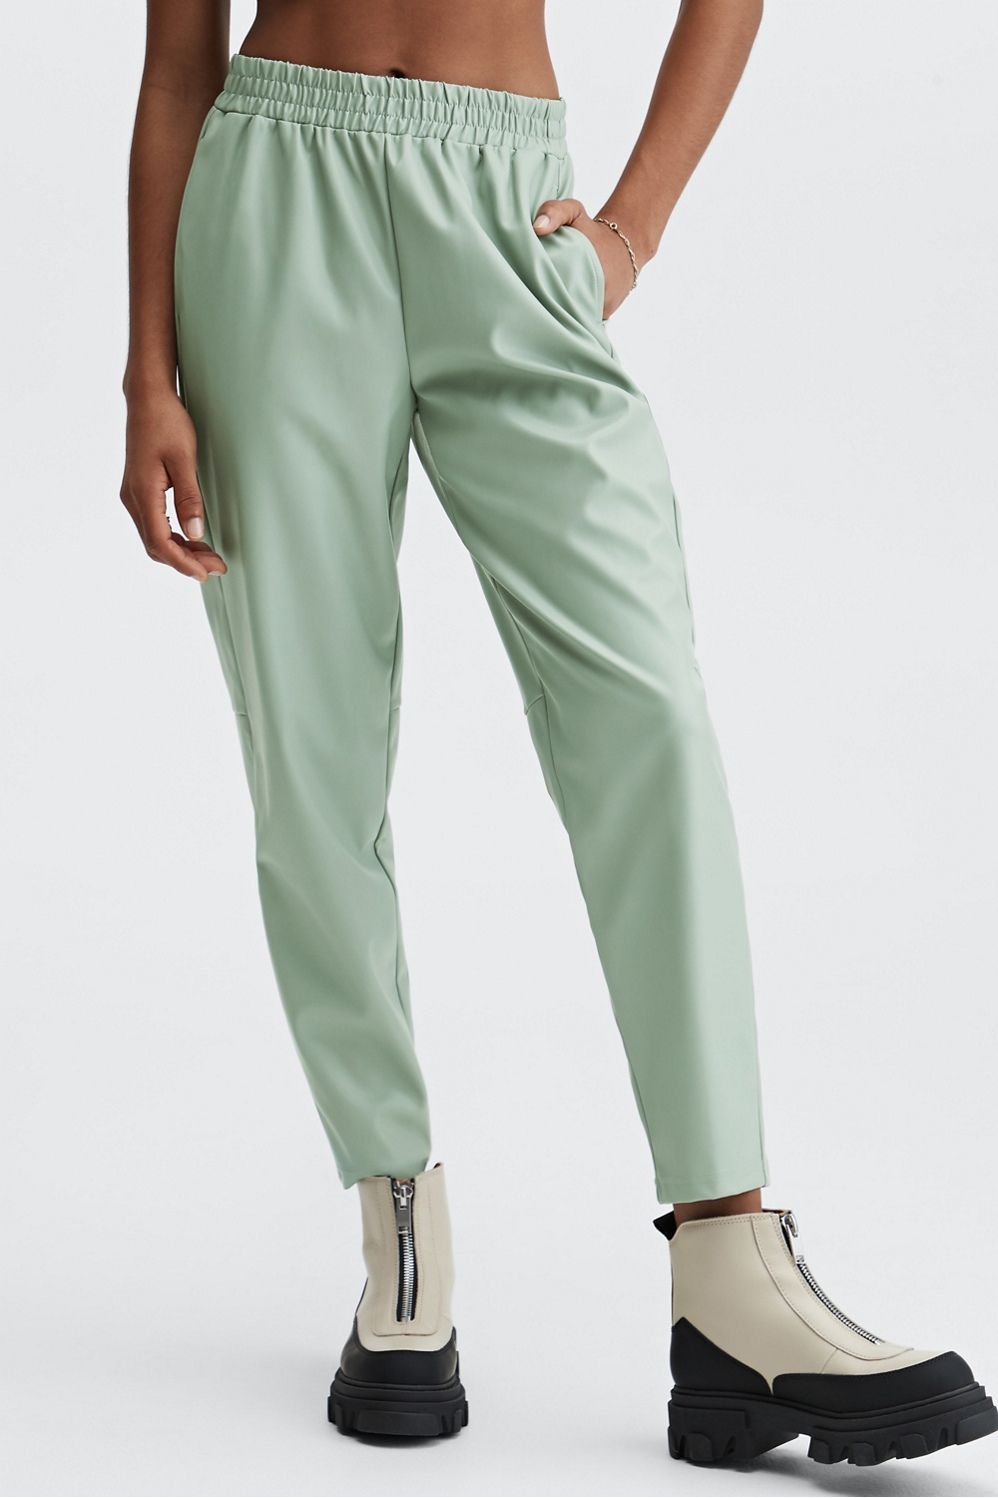 Vegan Leather High-Waisted Pant | Fabletics - North America